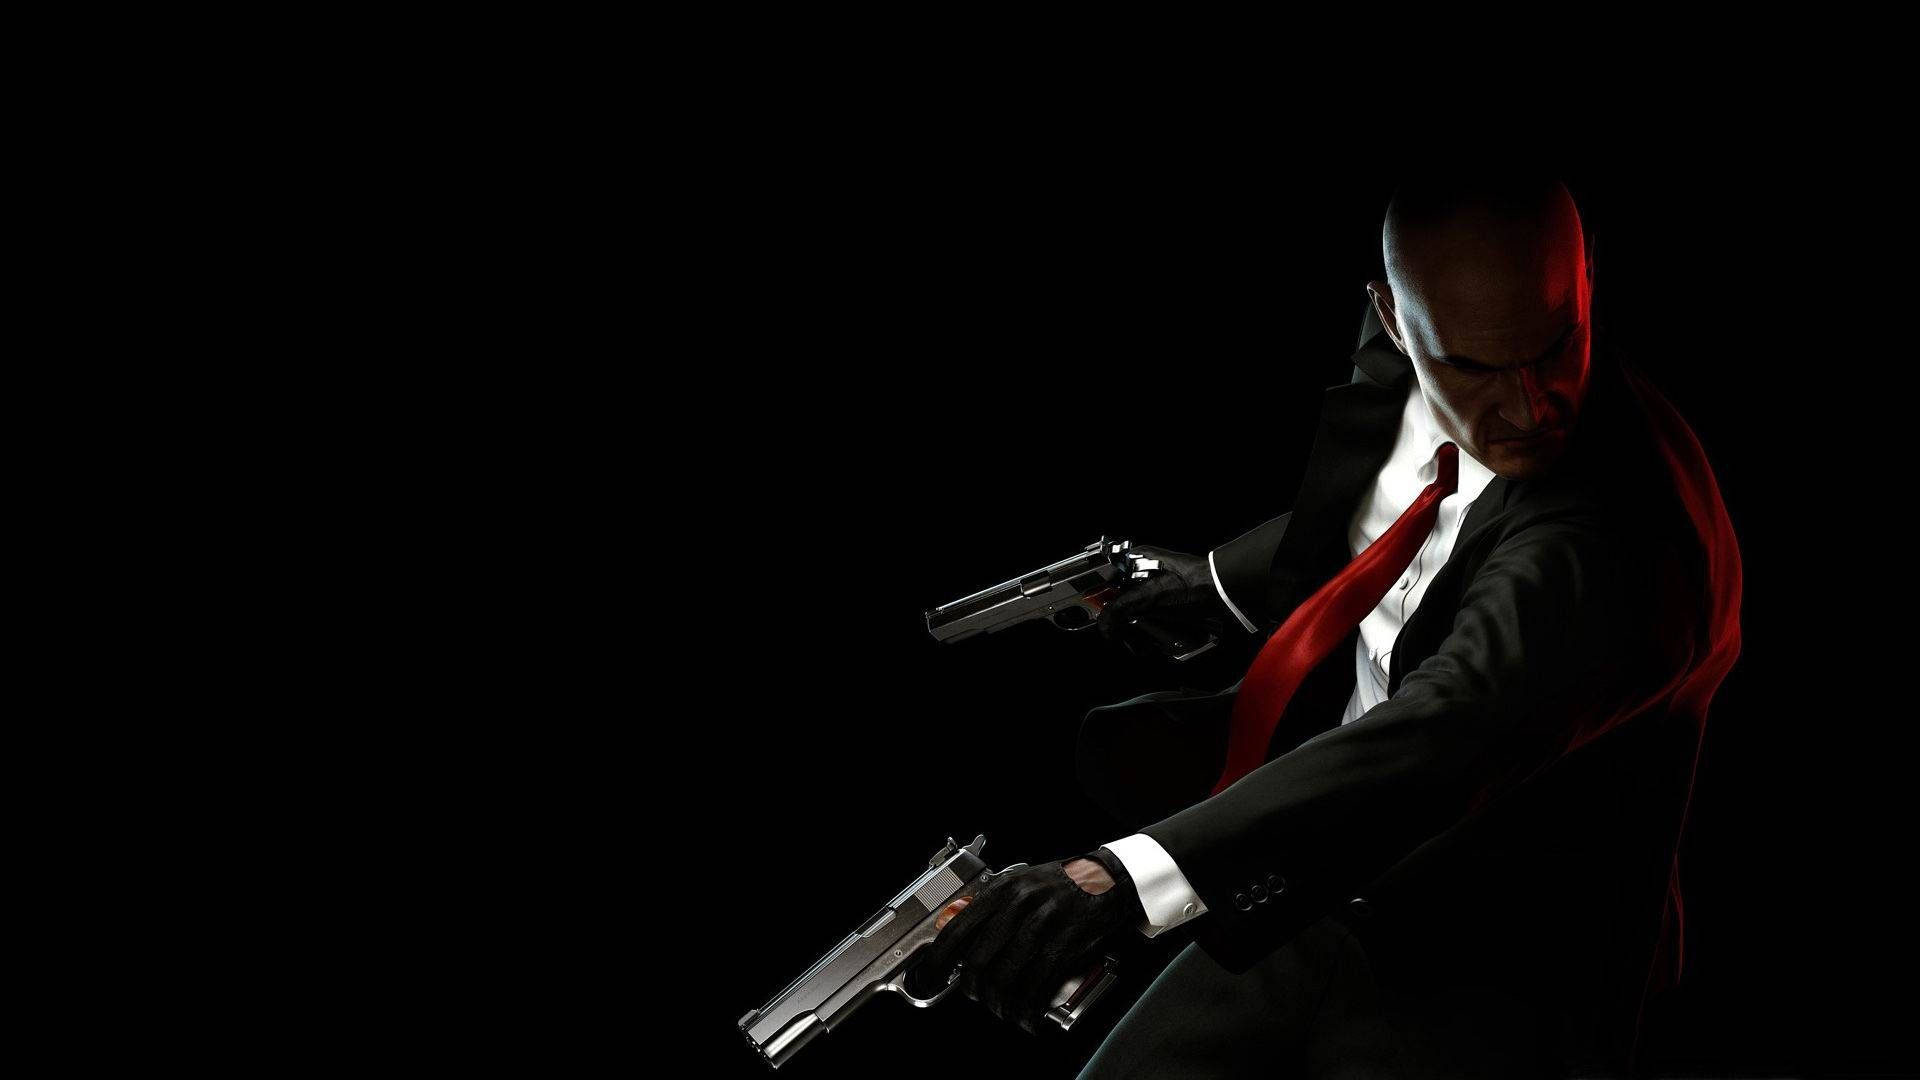 "Dark and Determined - The life of a Real Hitman" Wallpaper